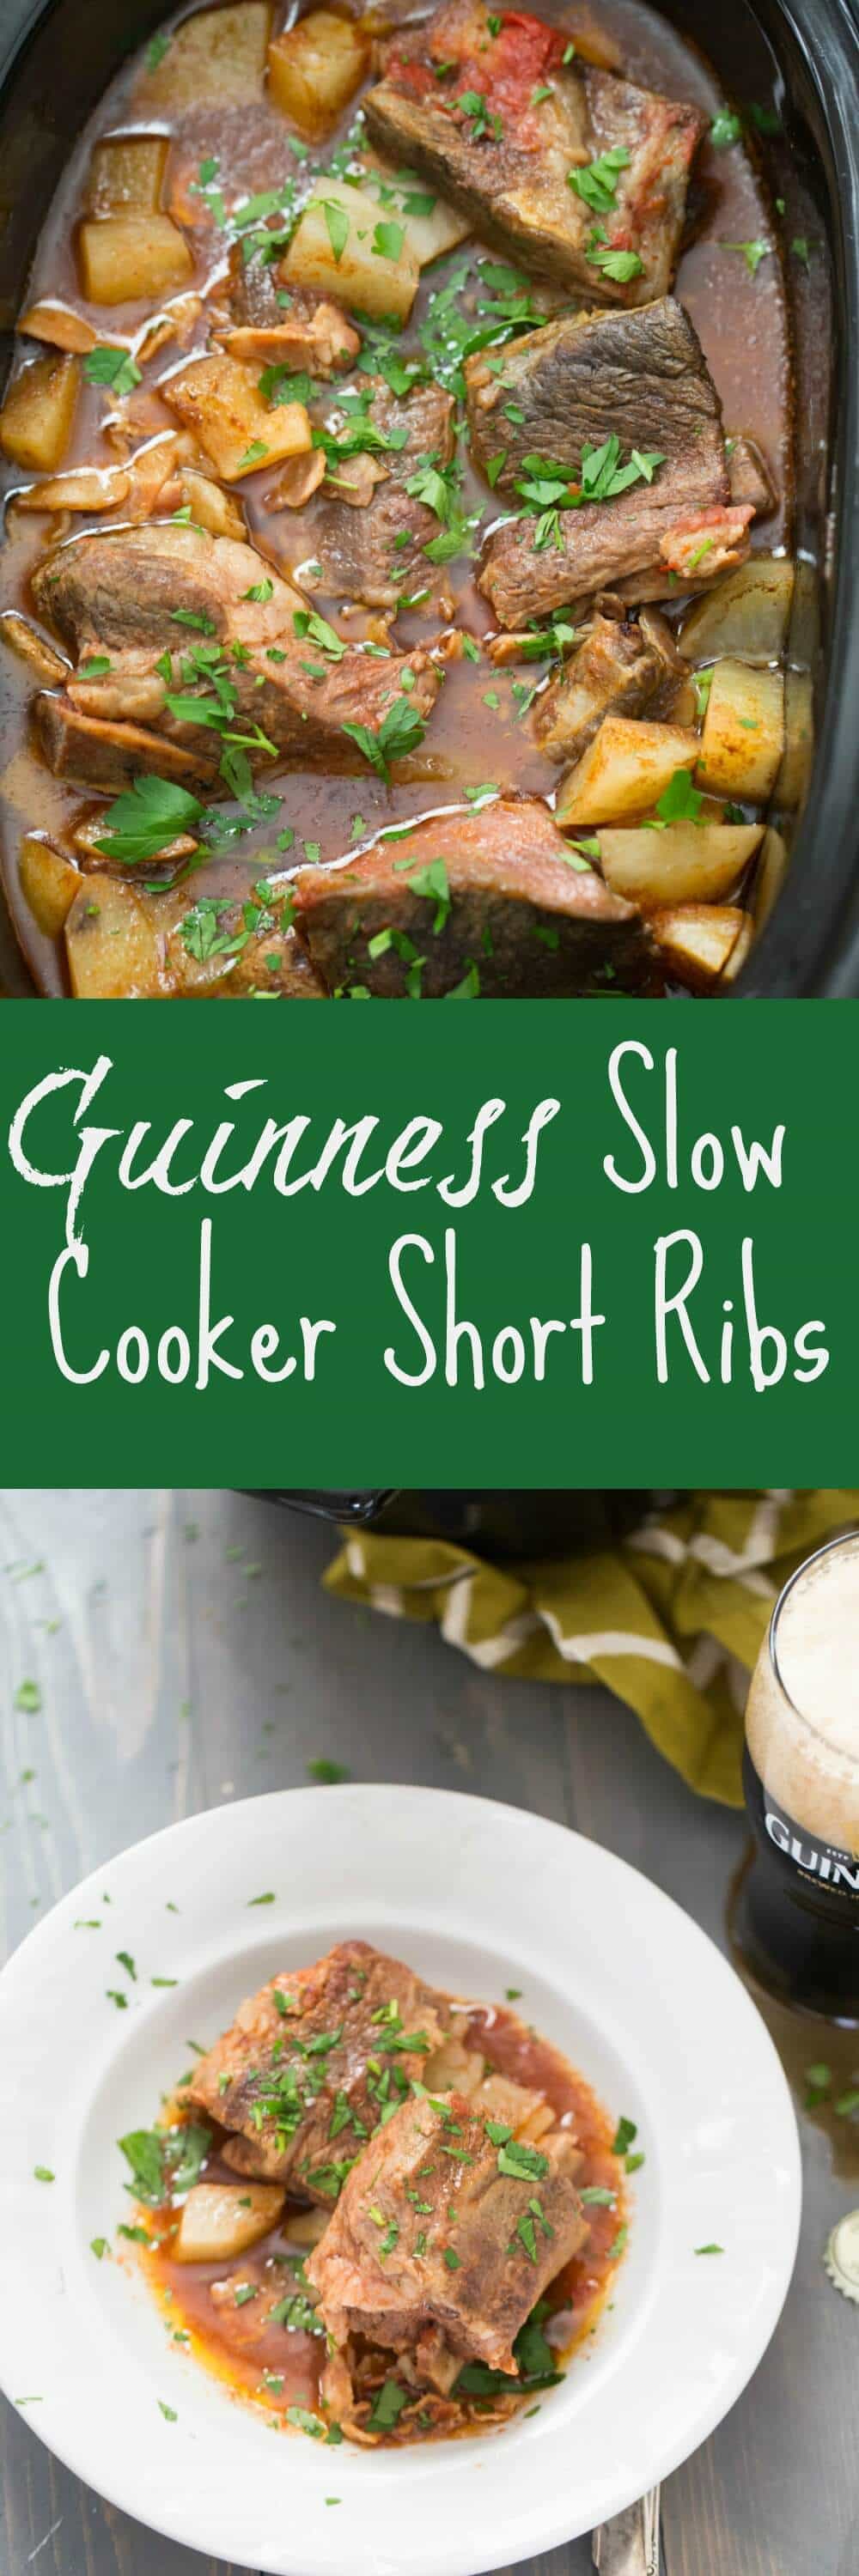 These slow cooker short ribs are fork-tender and delicious!  The bacon and the Guinness stout add so much flavor, be sure to soak it up with some good crusty bread!